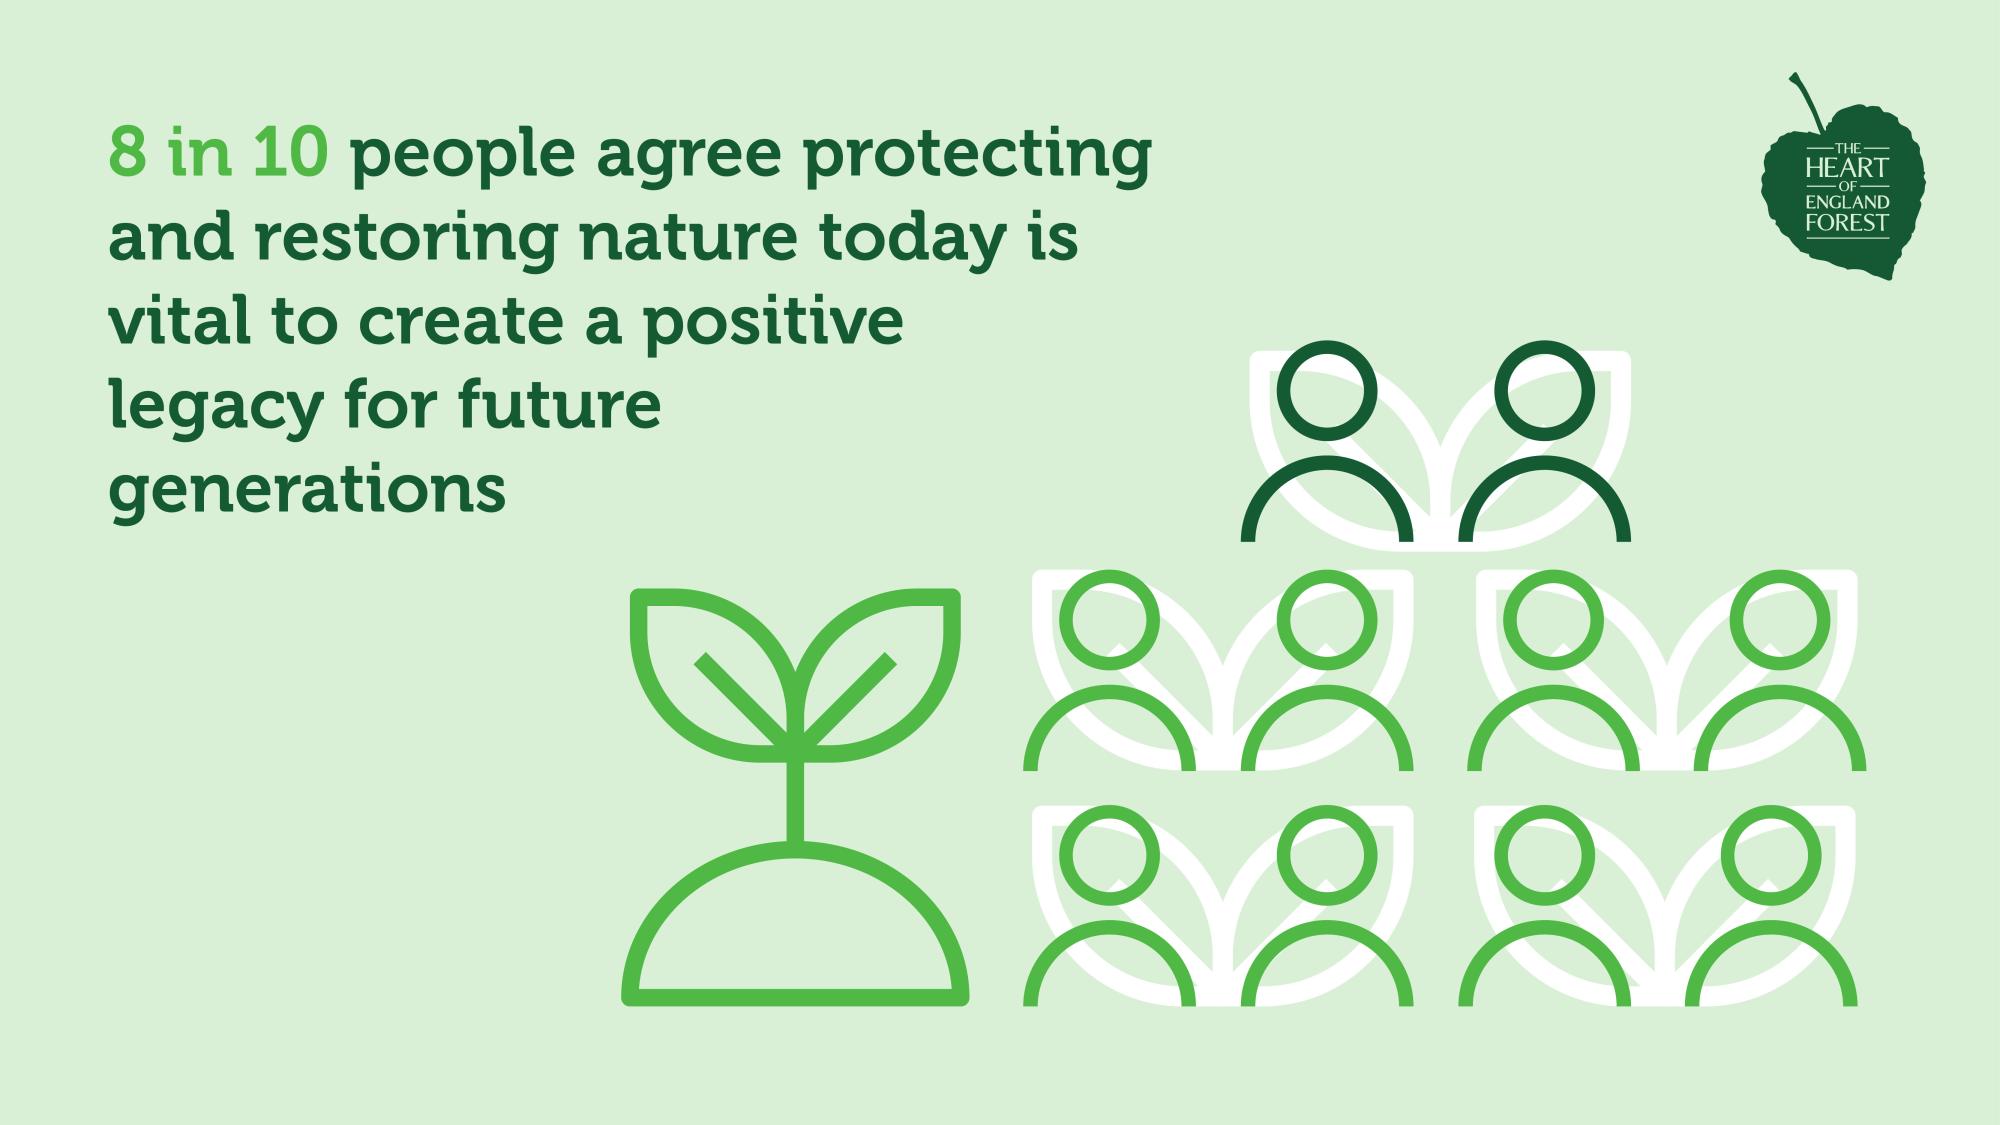 Infographic stating that 8 out of 10 people agree protecting and restoring nature today is vital to create a positive legacy for future generations